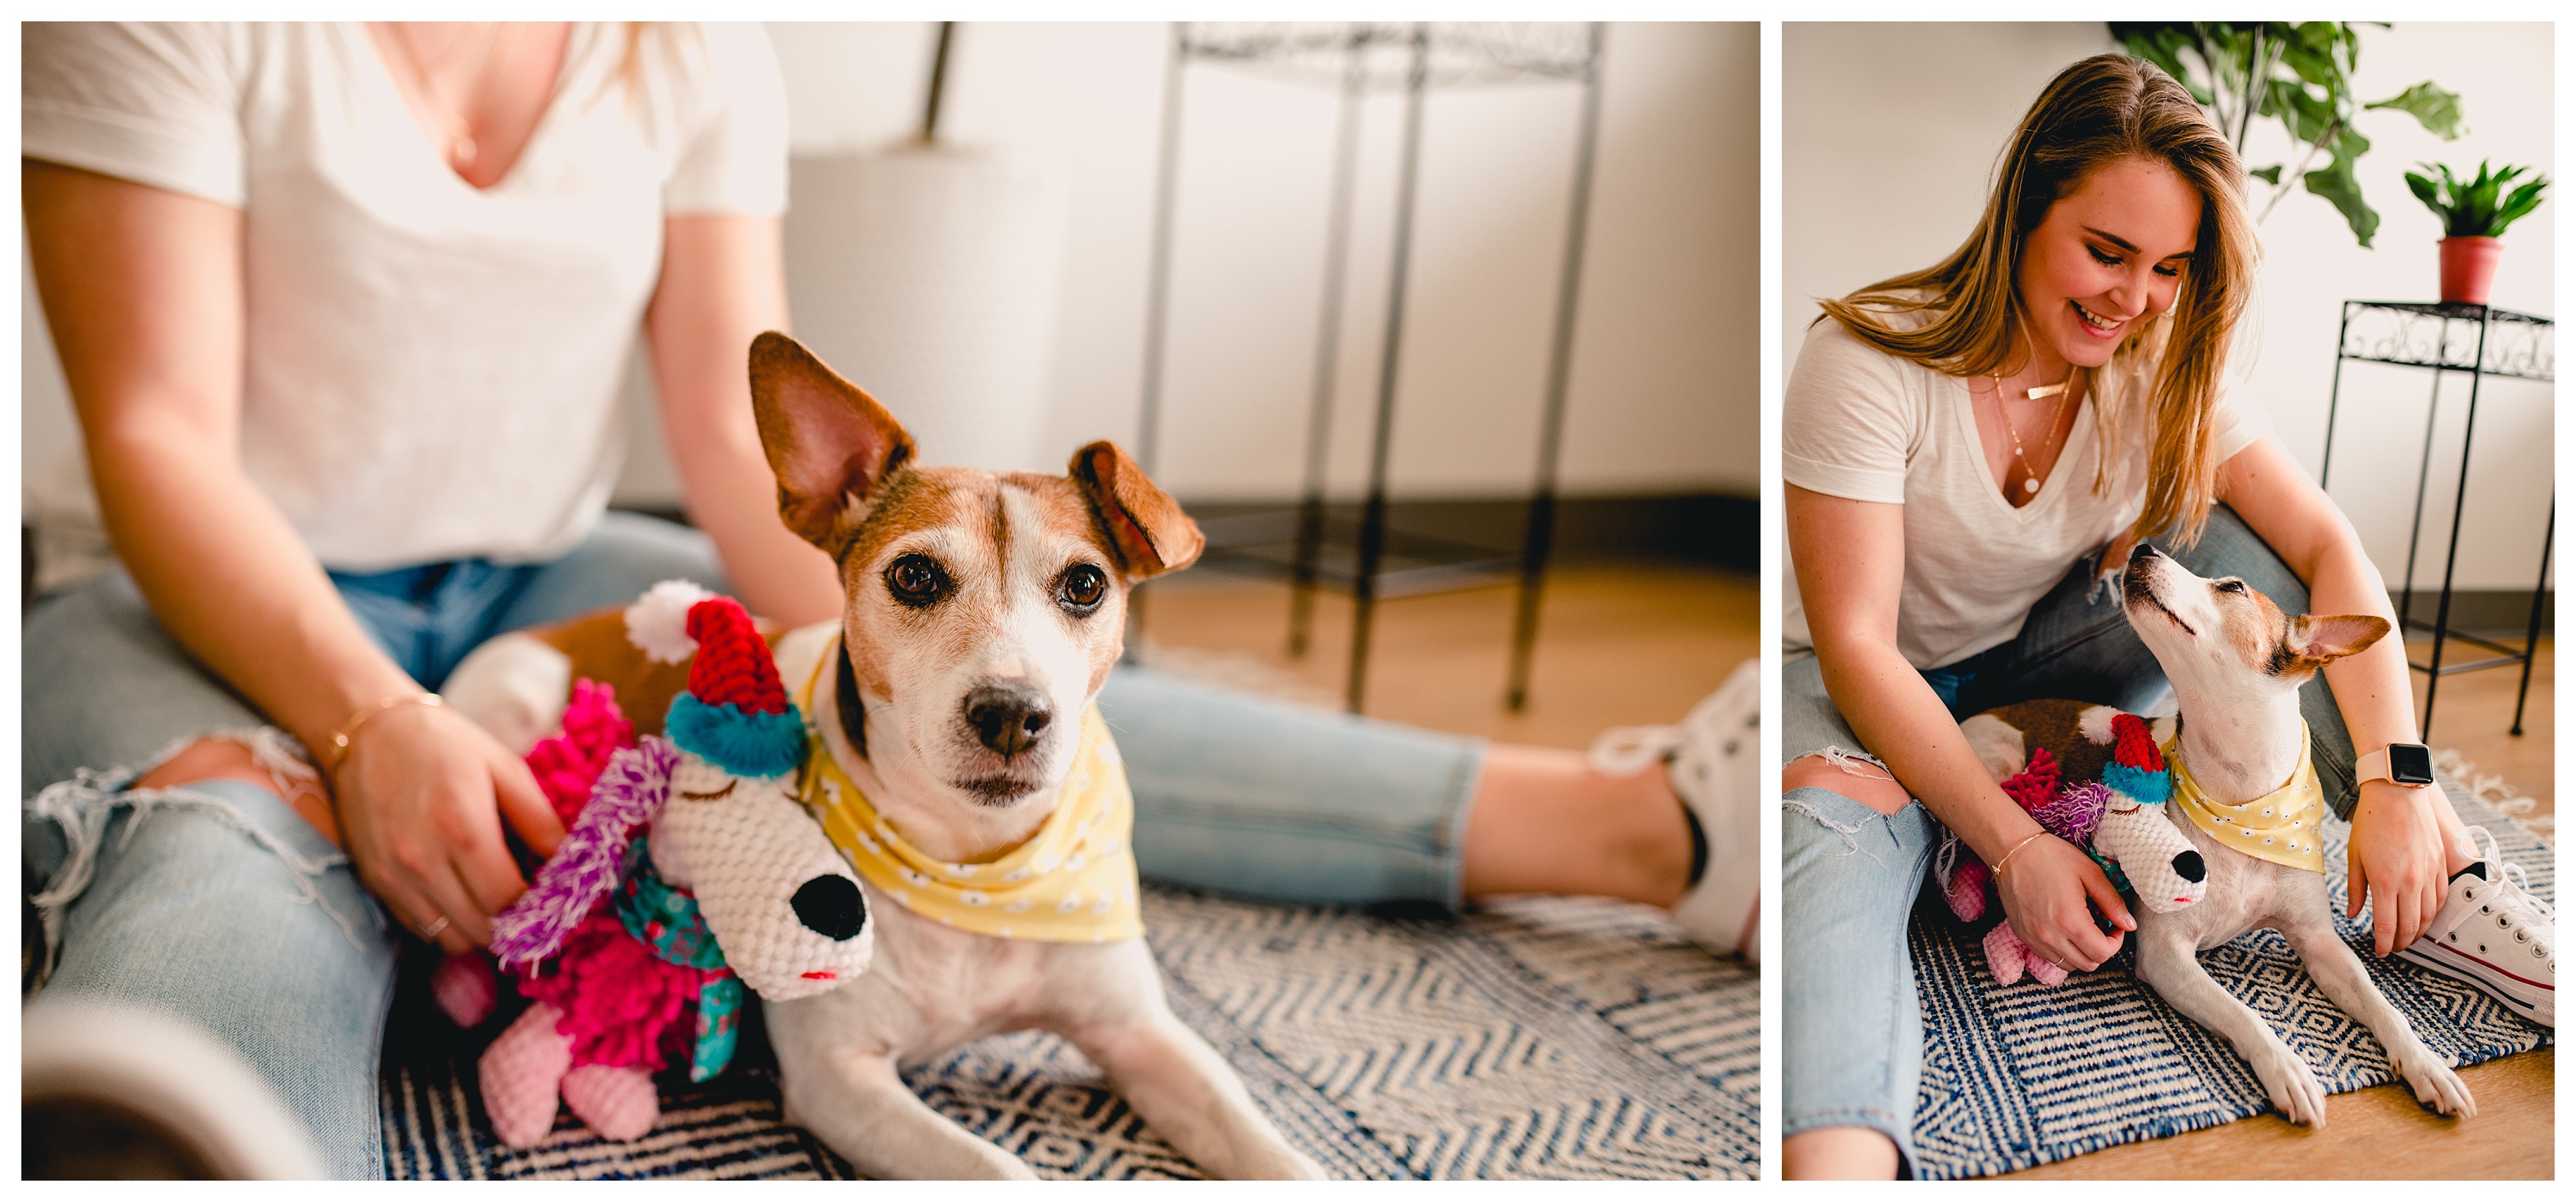 Playful lifestyle photography of dog and dog's human in Florida. Shelly Williams Photography